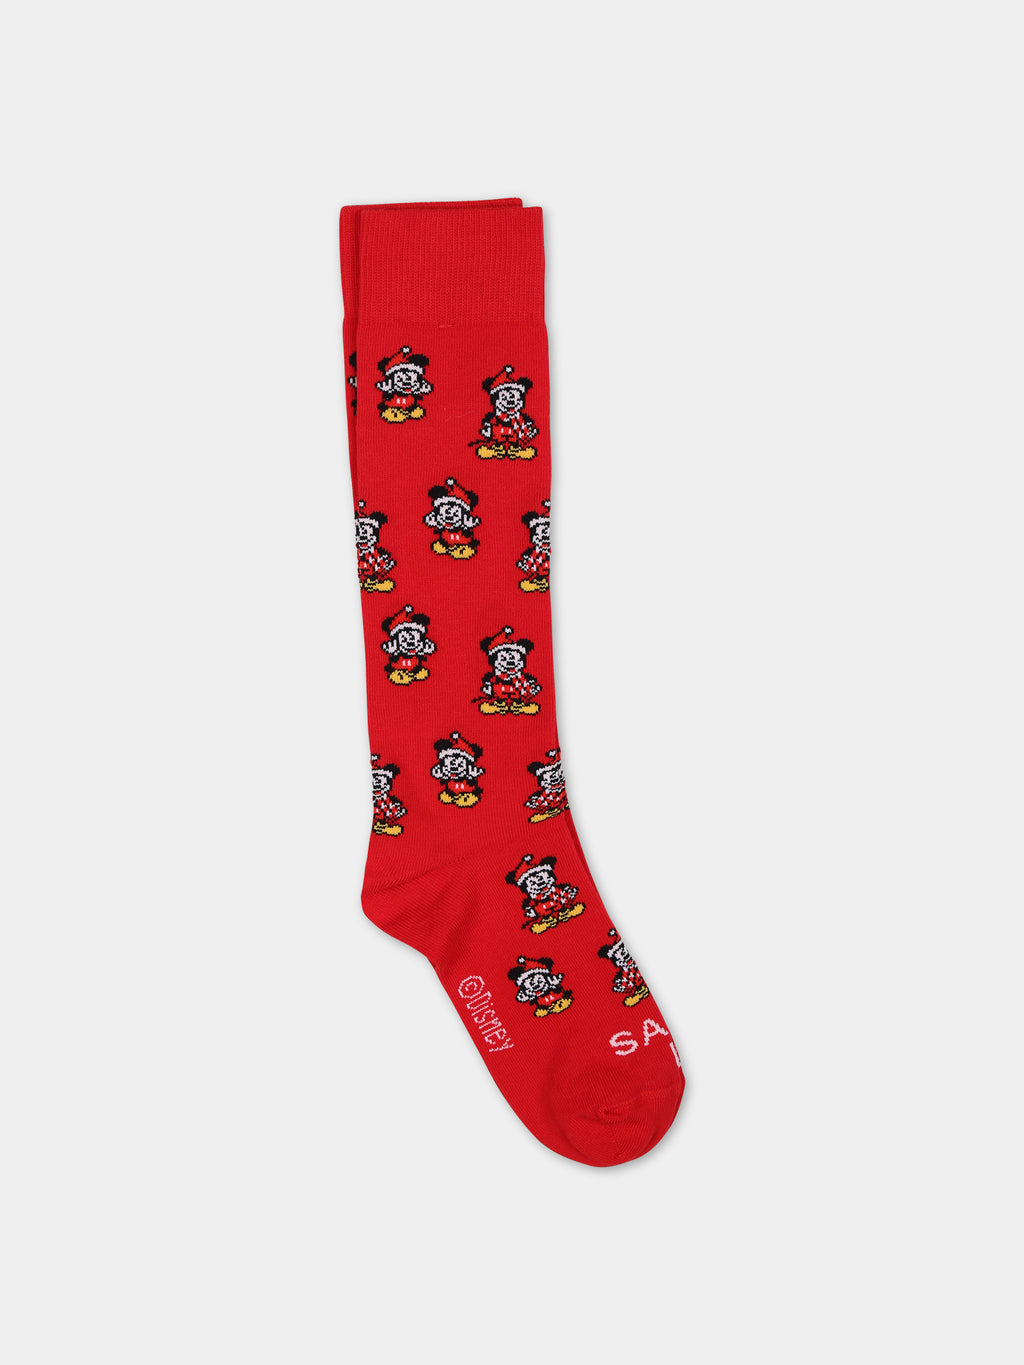 Red socks for kids with Mickey Mouse